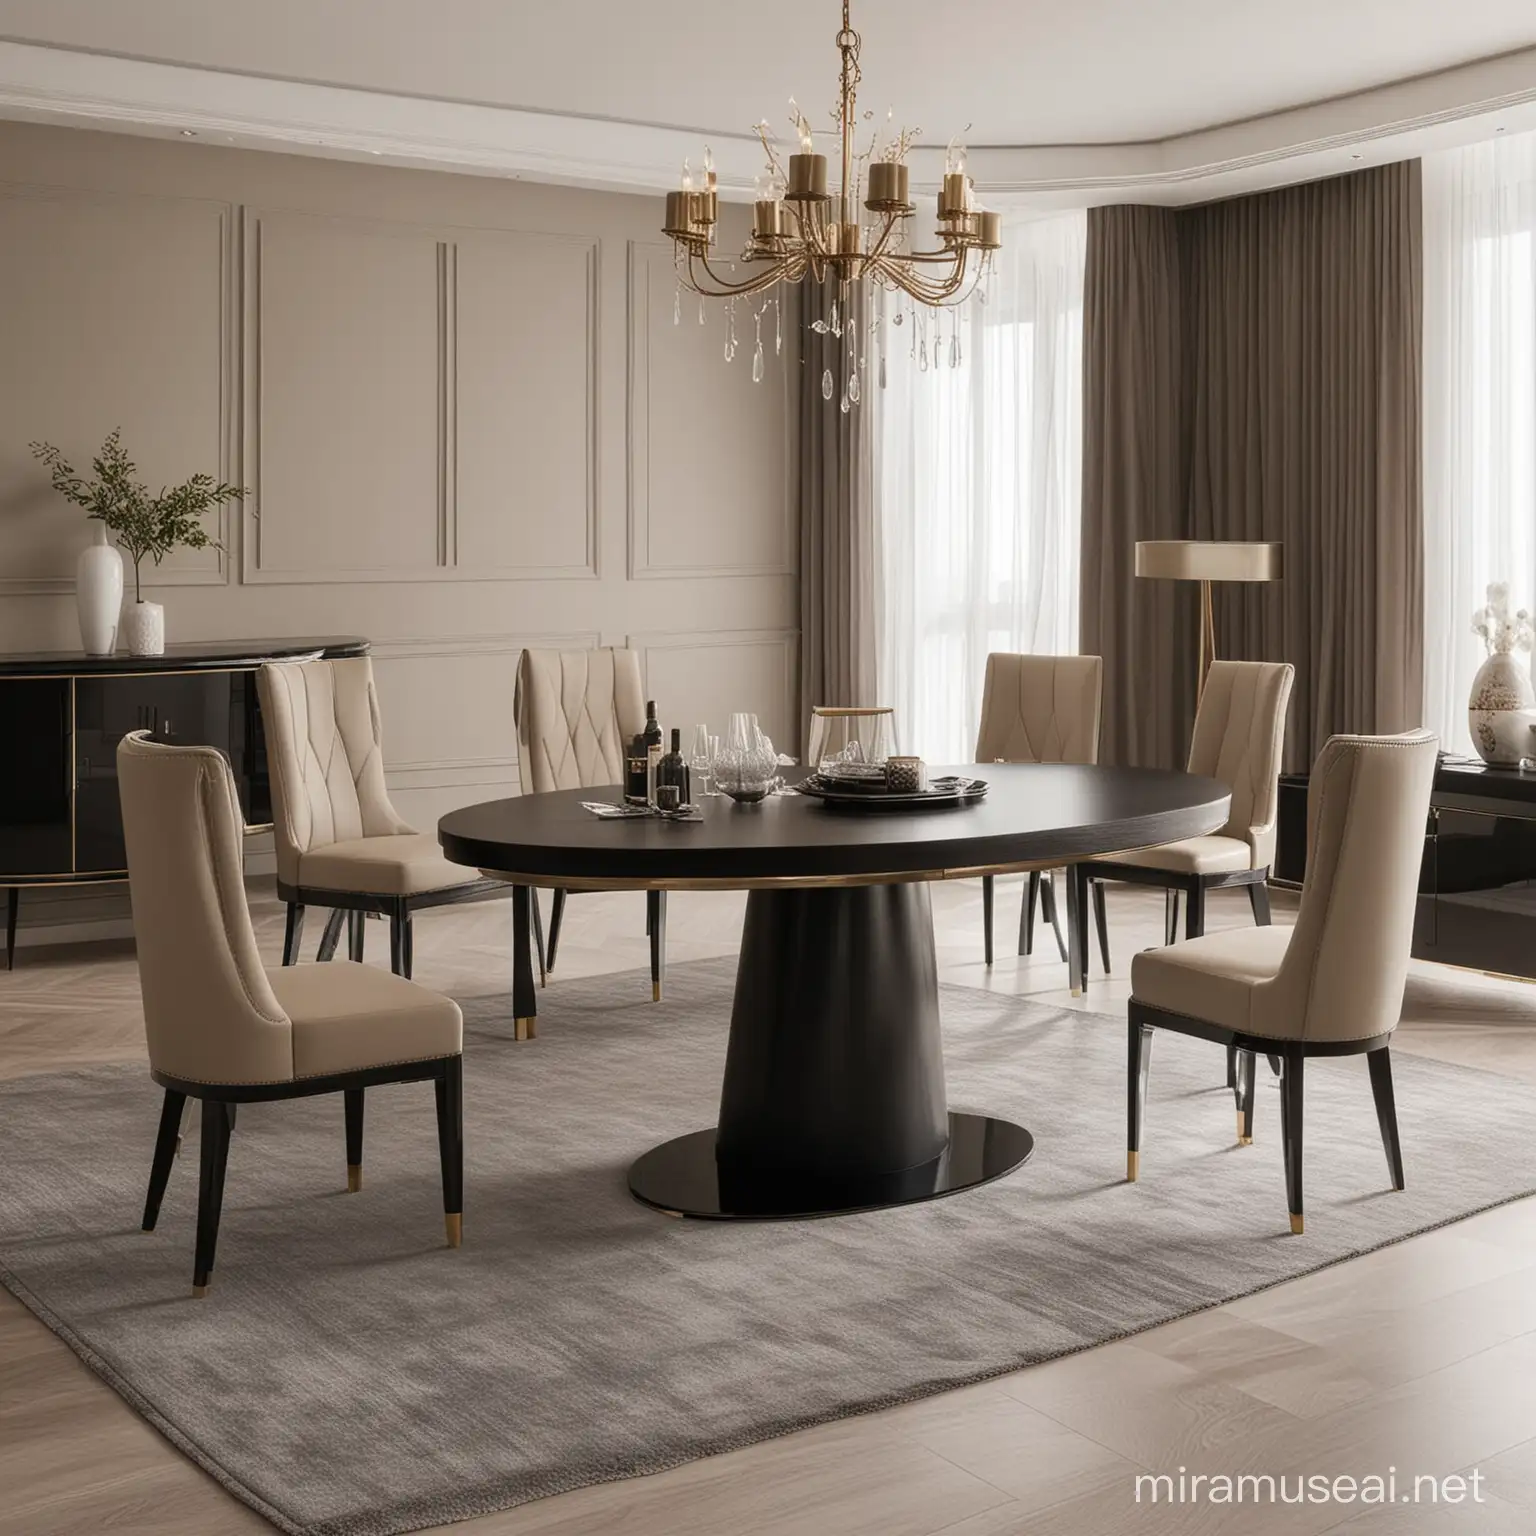 Modern Luxury Dining Room Set for 8 People with Black Oval Table and Bench